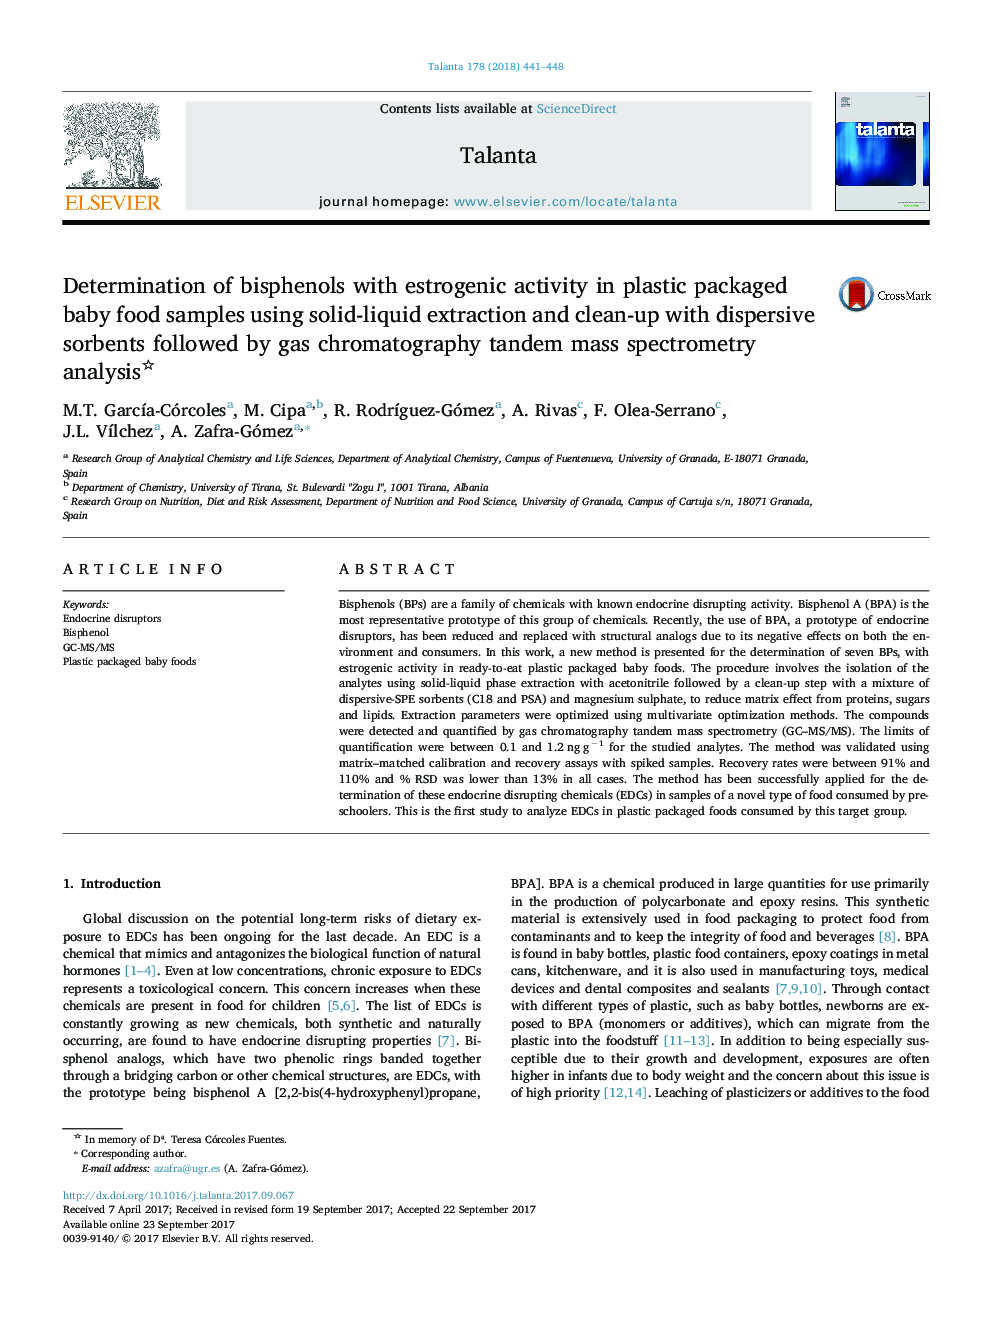 Determination of bisphenols with estrogenic activity in plastic packaged baby food samples using solid-liquid extraction and clean-up with dispersive sorbents followed by gas chromatography tandem mass spectrometry analysis